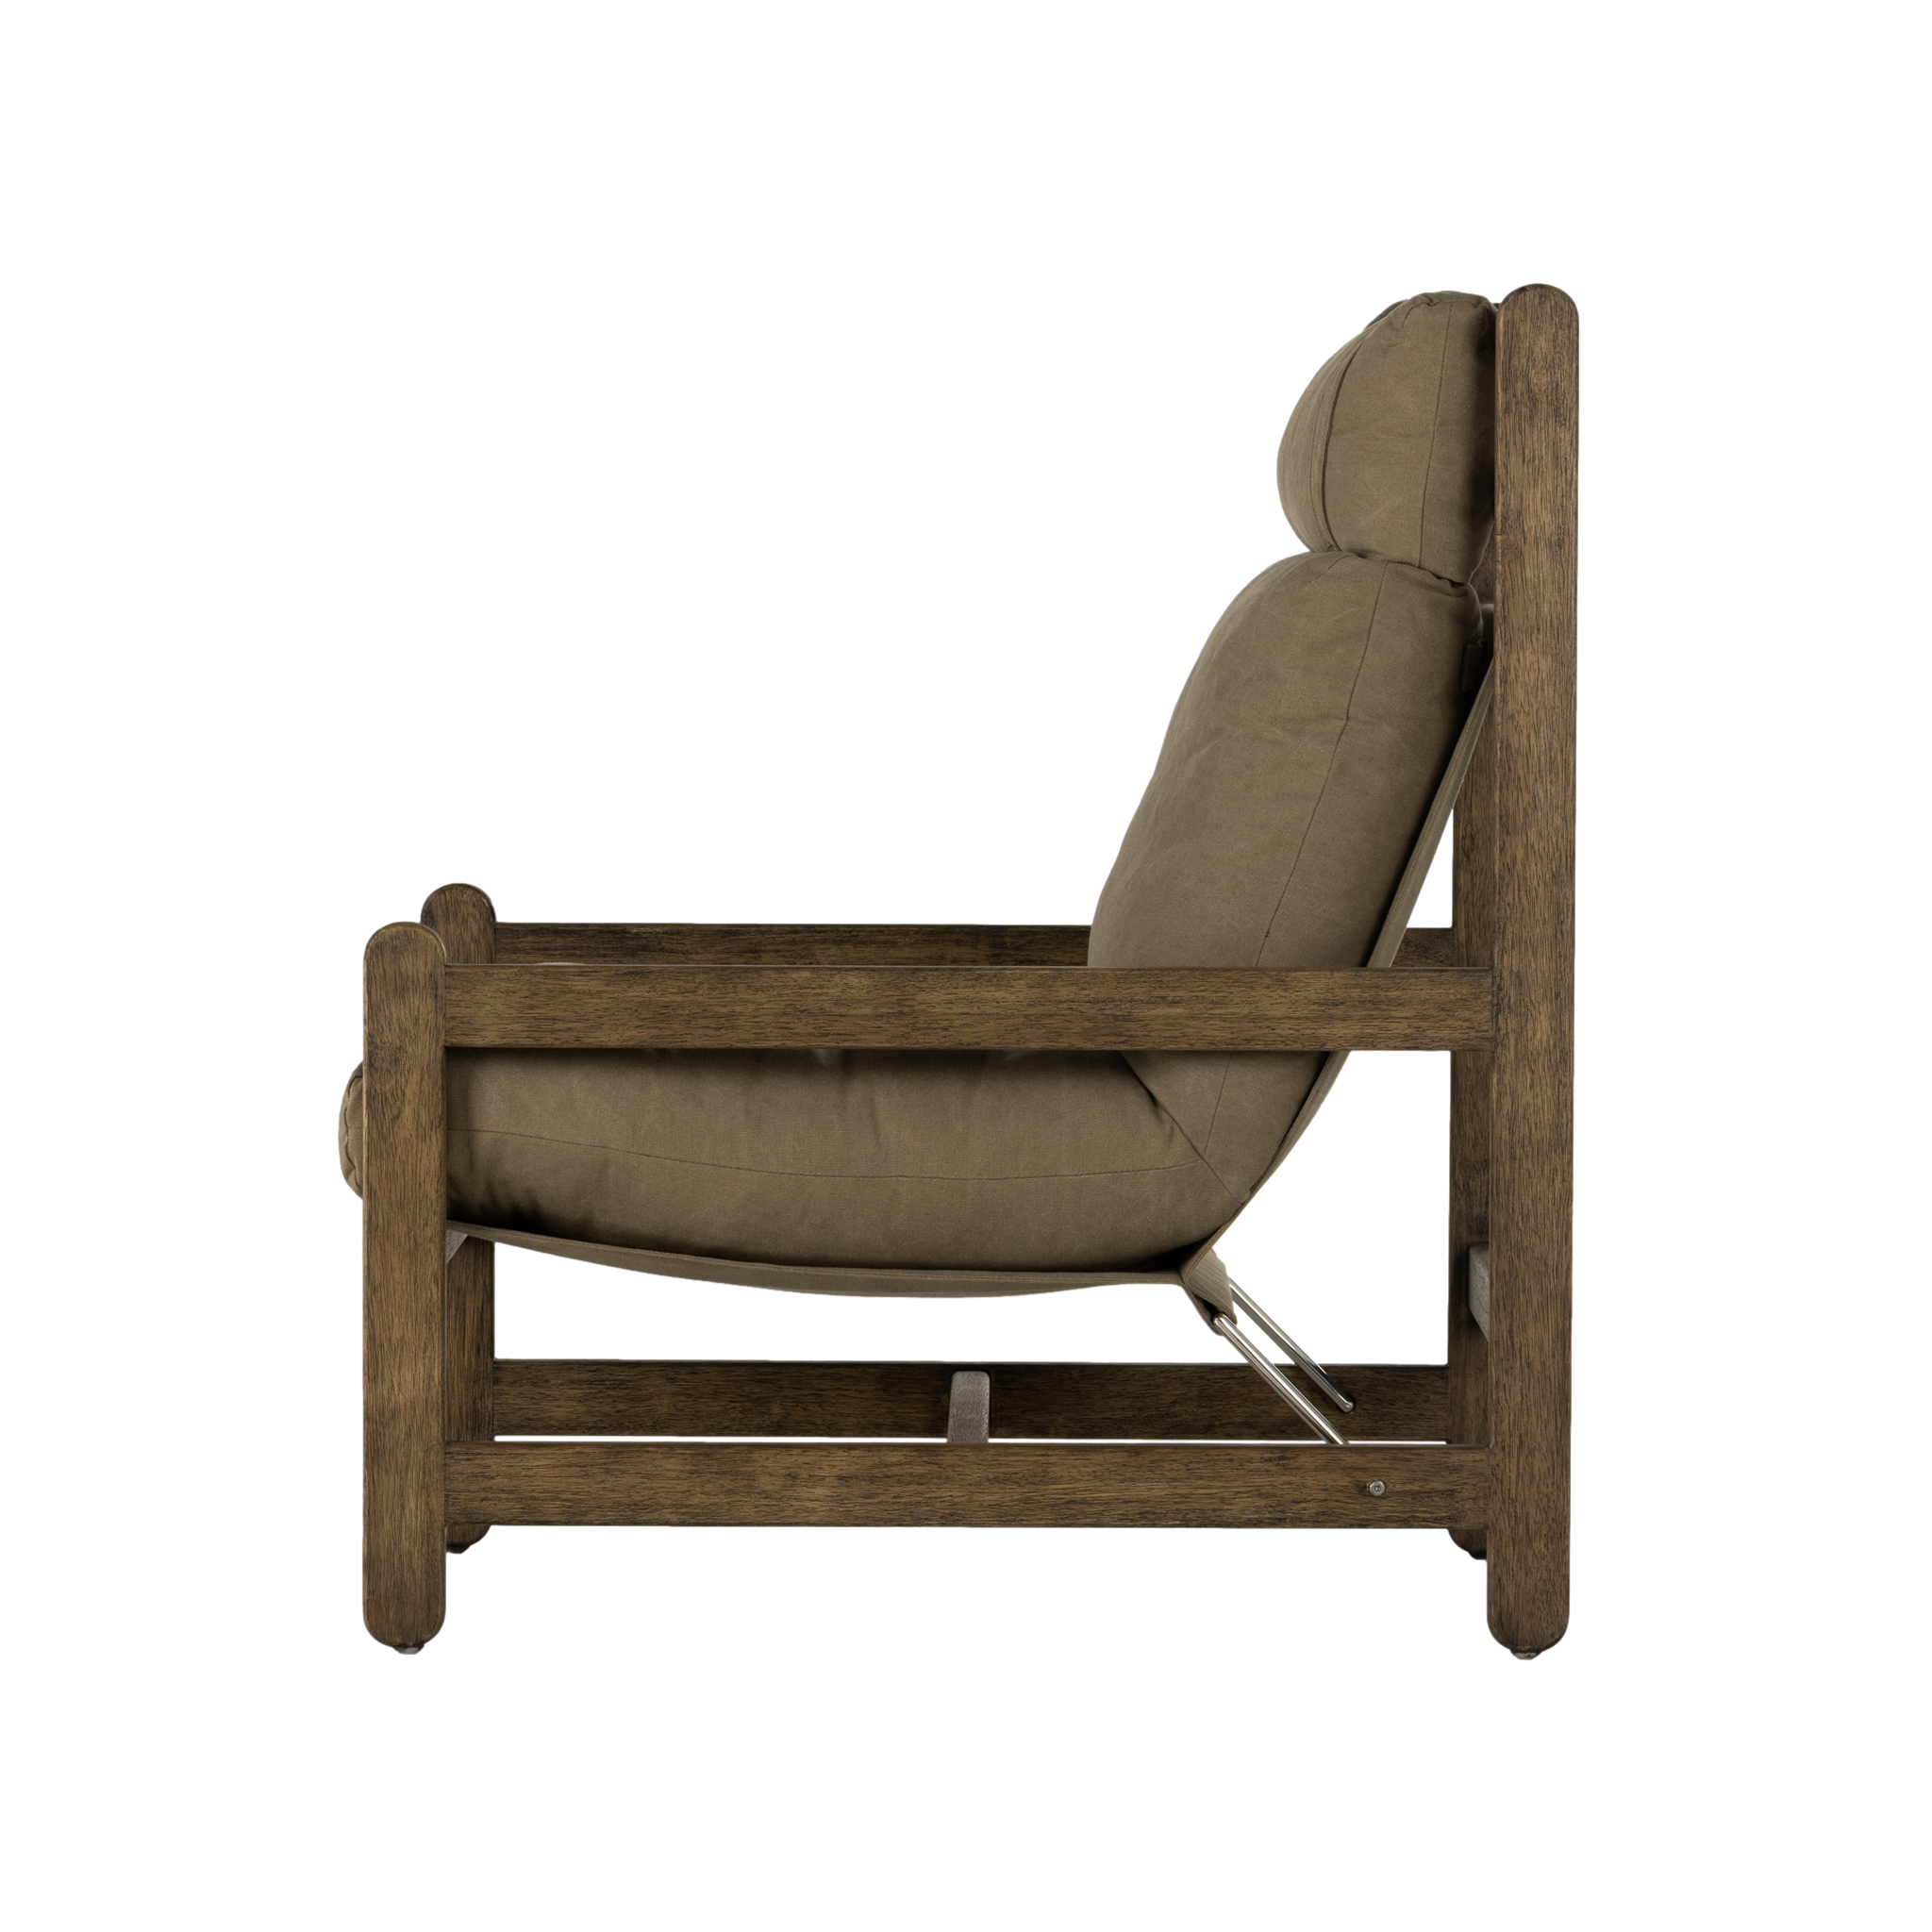 Gillespie Chair in Fawn